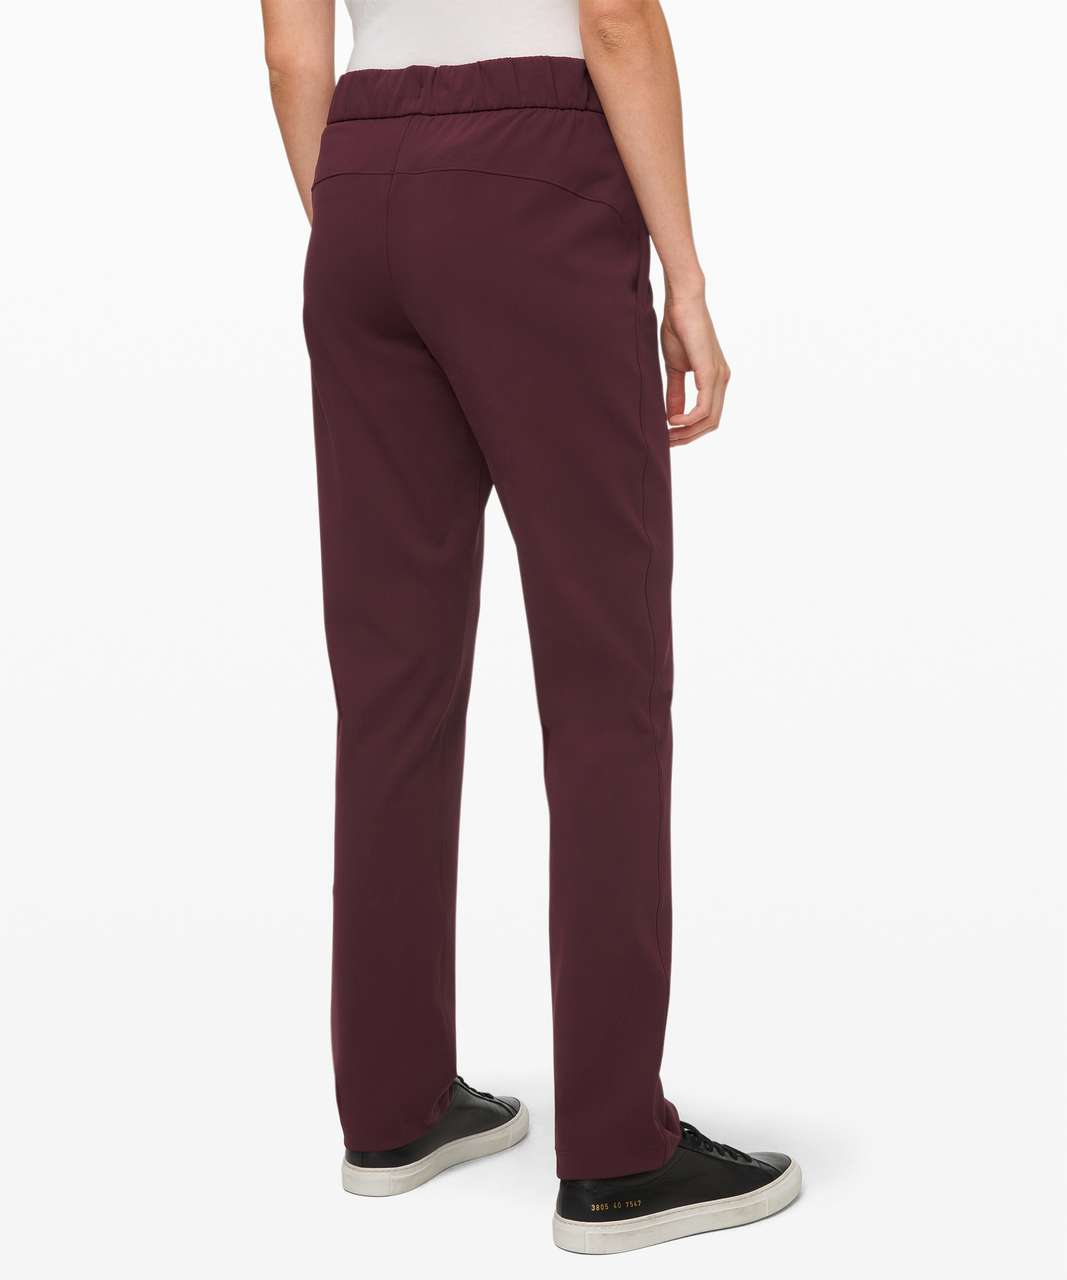 Lululemon On the Fly Pant Tall 33" - Cassis